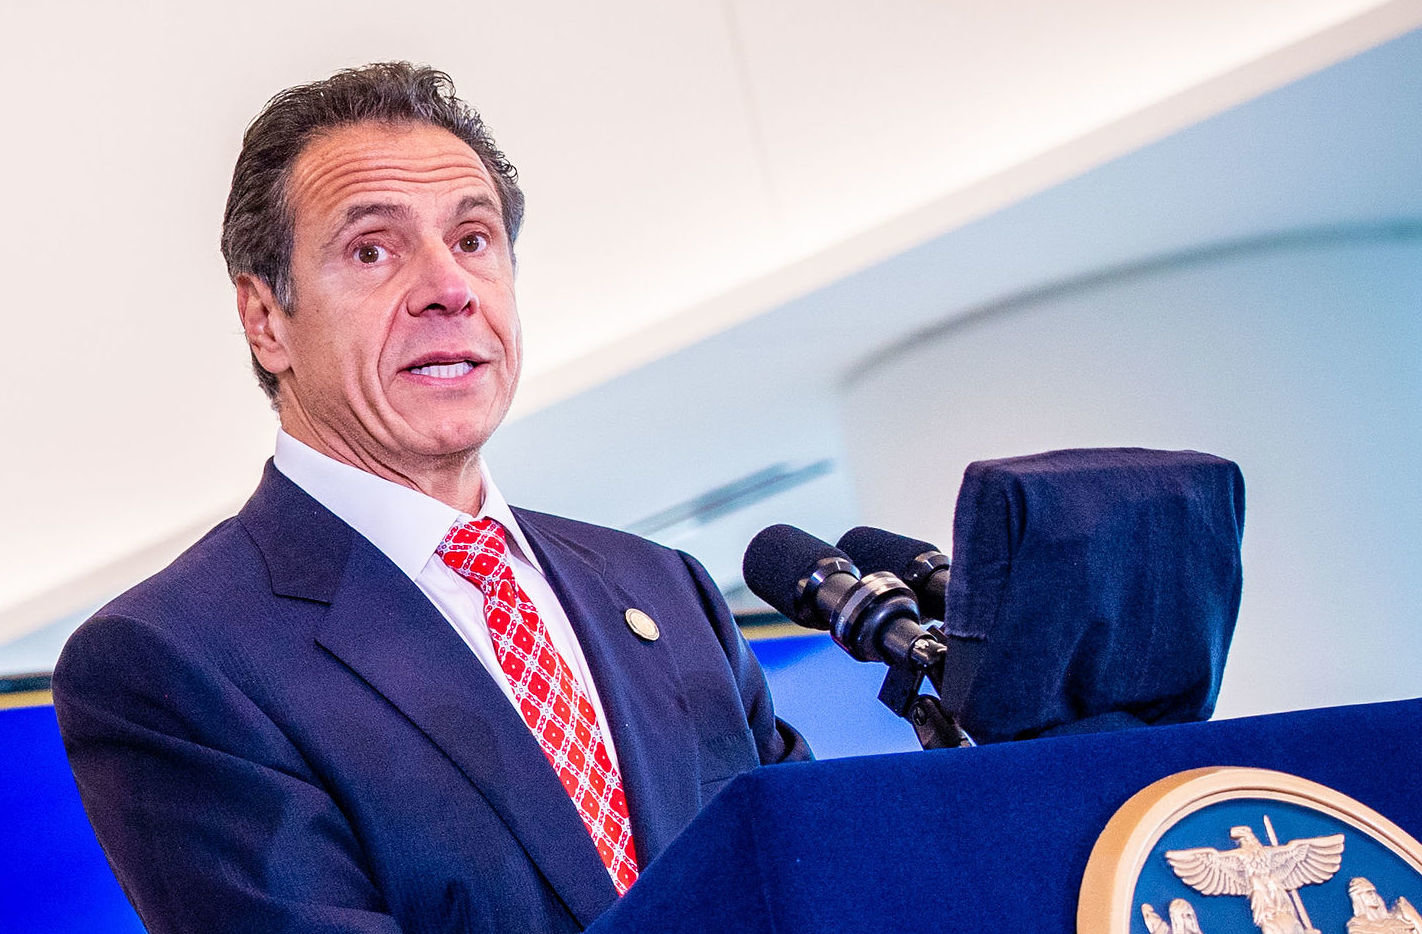 Former Gov. Andrew Cuomo resigned Aug. 24, avoiding a likely impeachment trial, after AG Letitia James’s investigation began exploring accusations that he had sexually harassed 11 women.